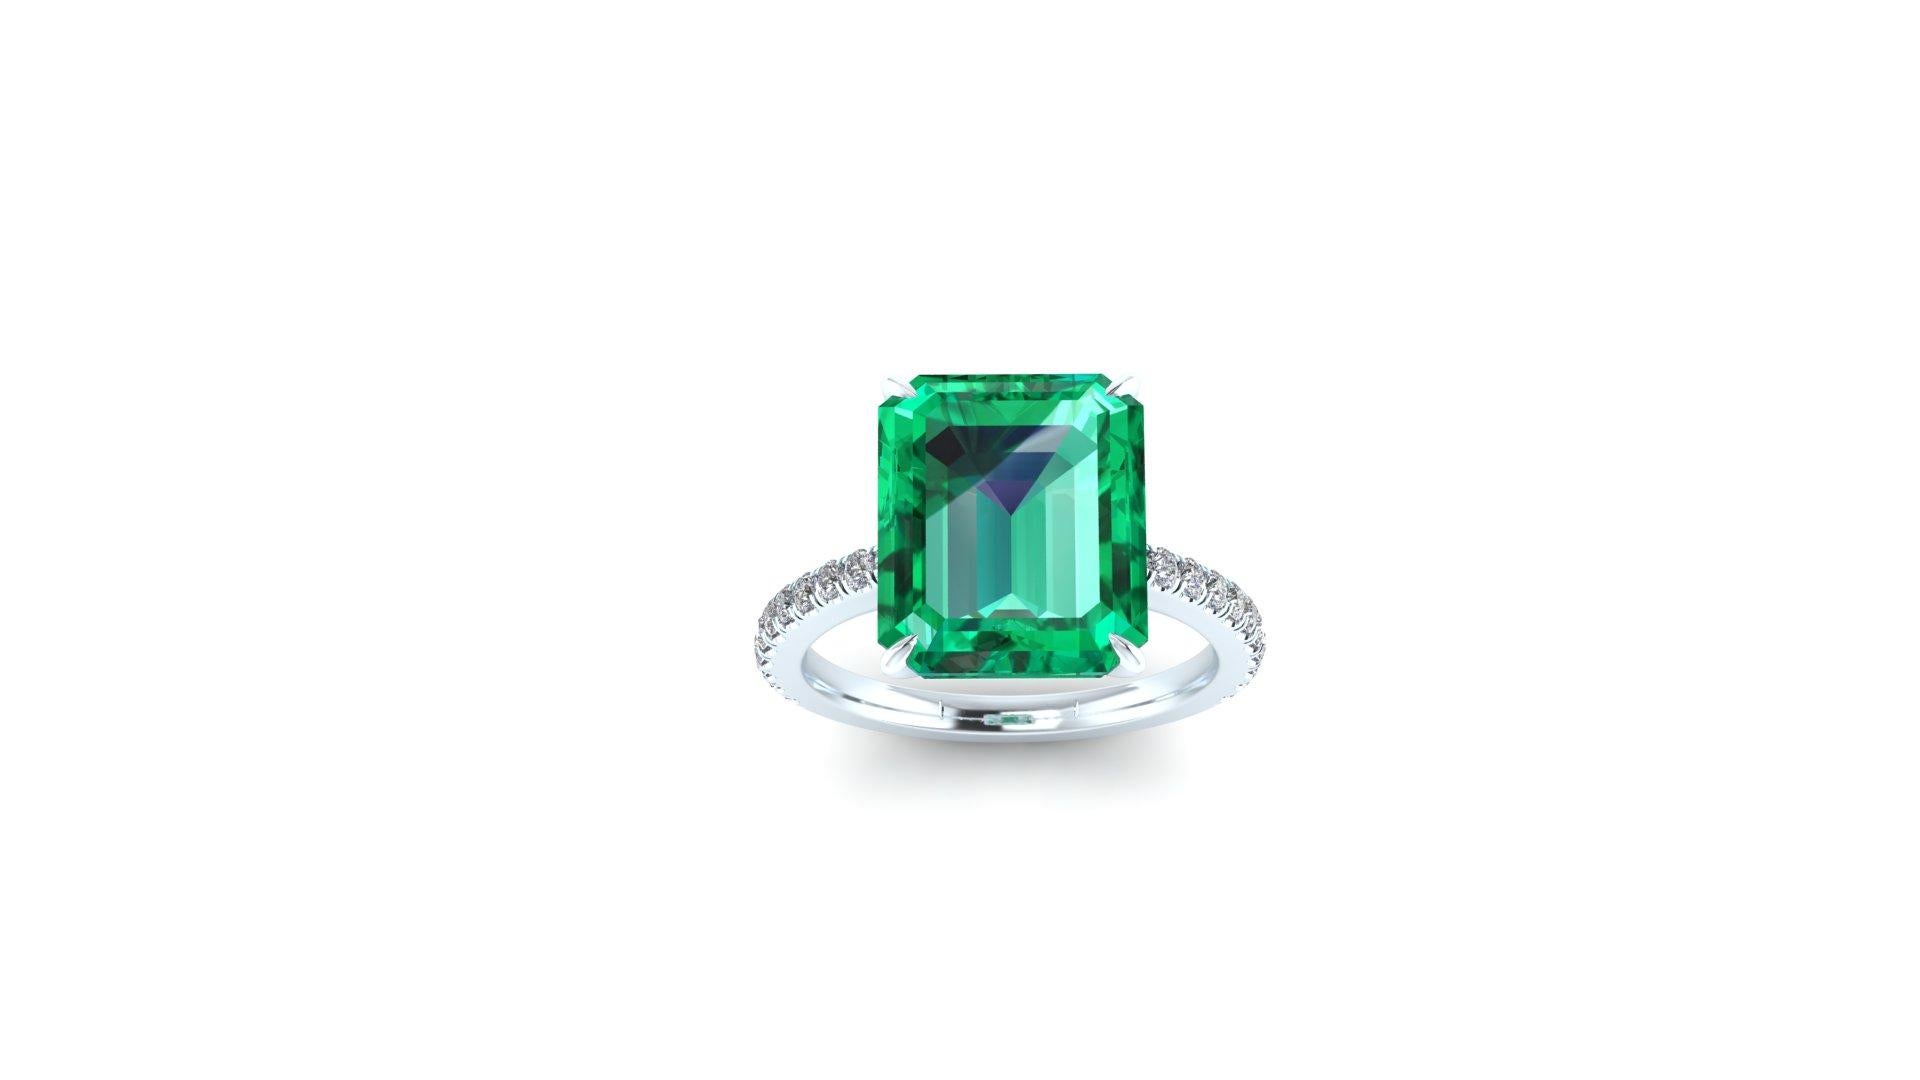 5.75 Ct Emerald GIA Certified Intense Green, Very Eye Clean Mineral 2